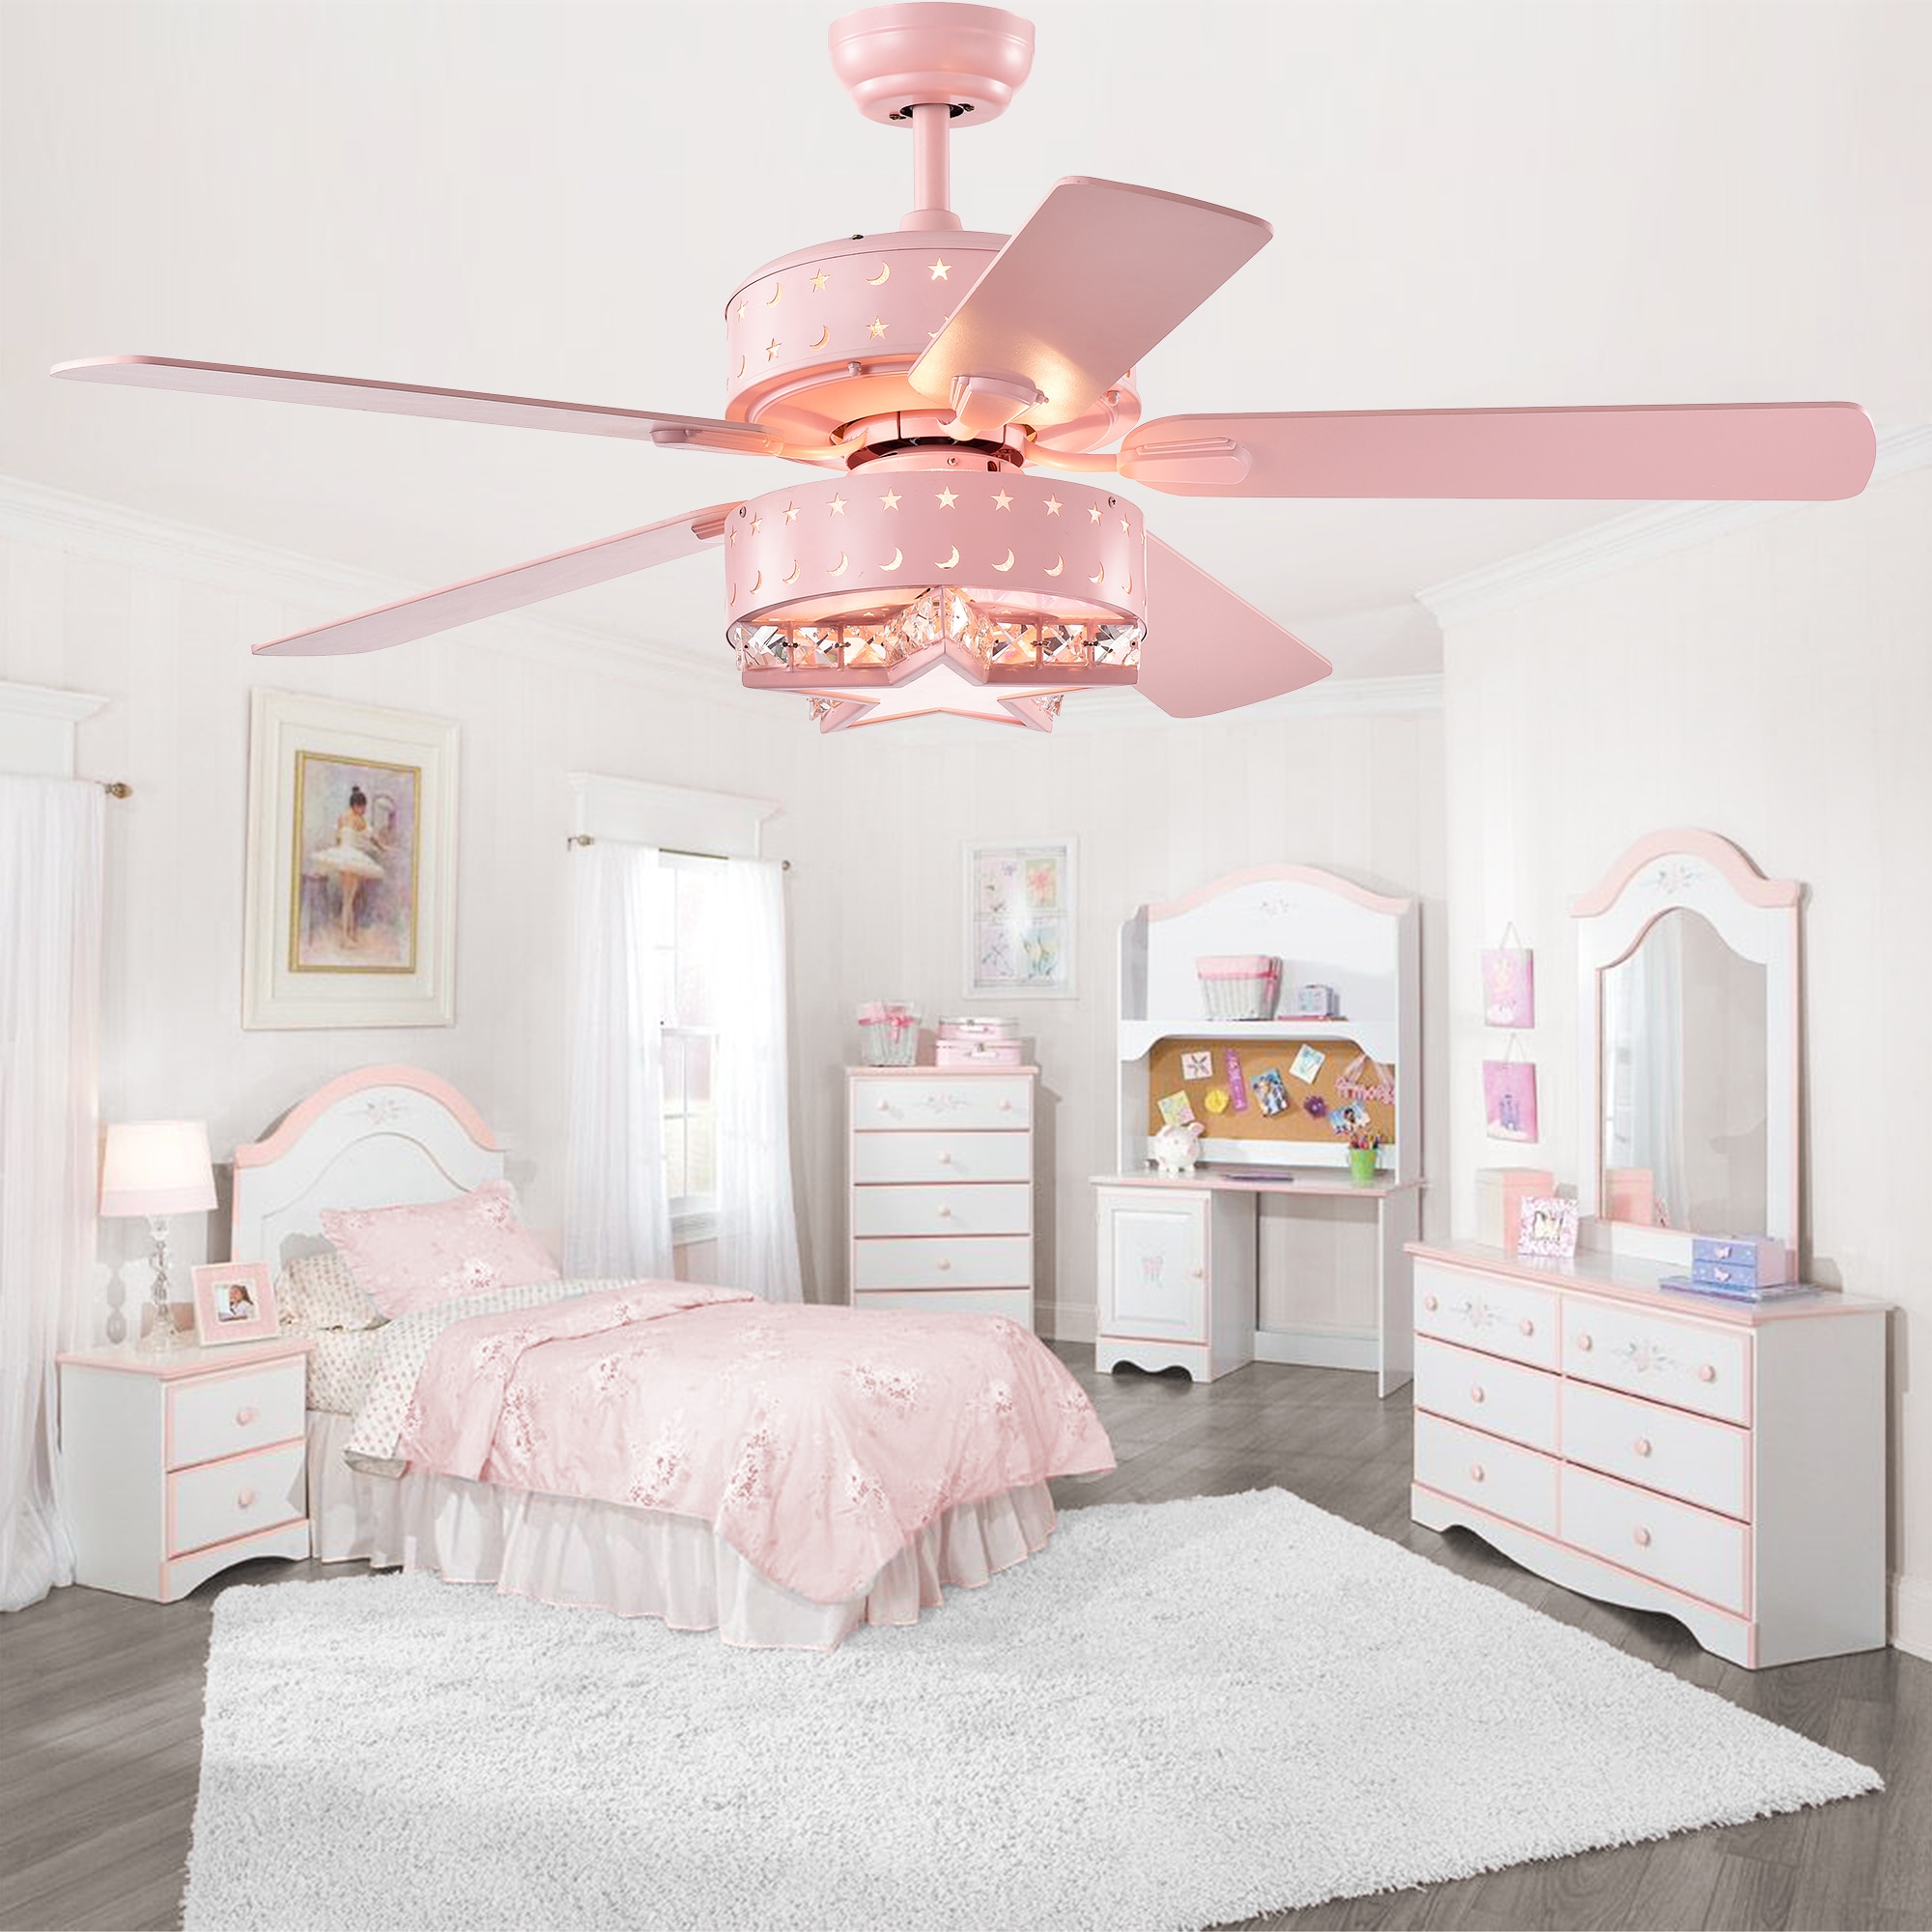 Home Accessories Inc 52 In Pink Indoor Ceiling Fan With Light And Remote 5 Blade The Fans Department At Lowes Com